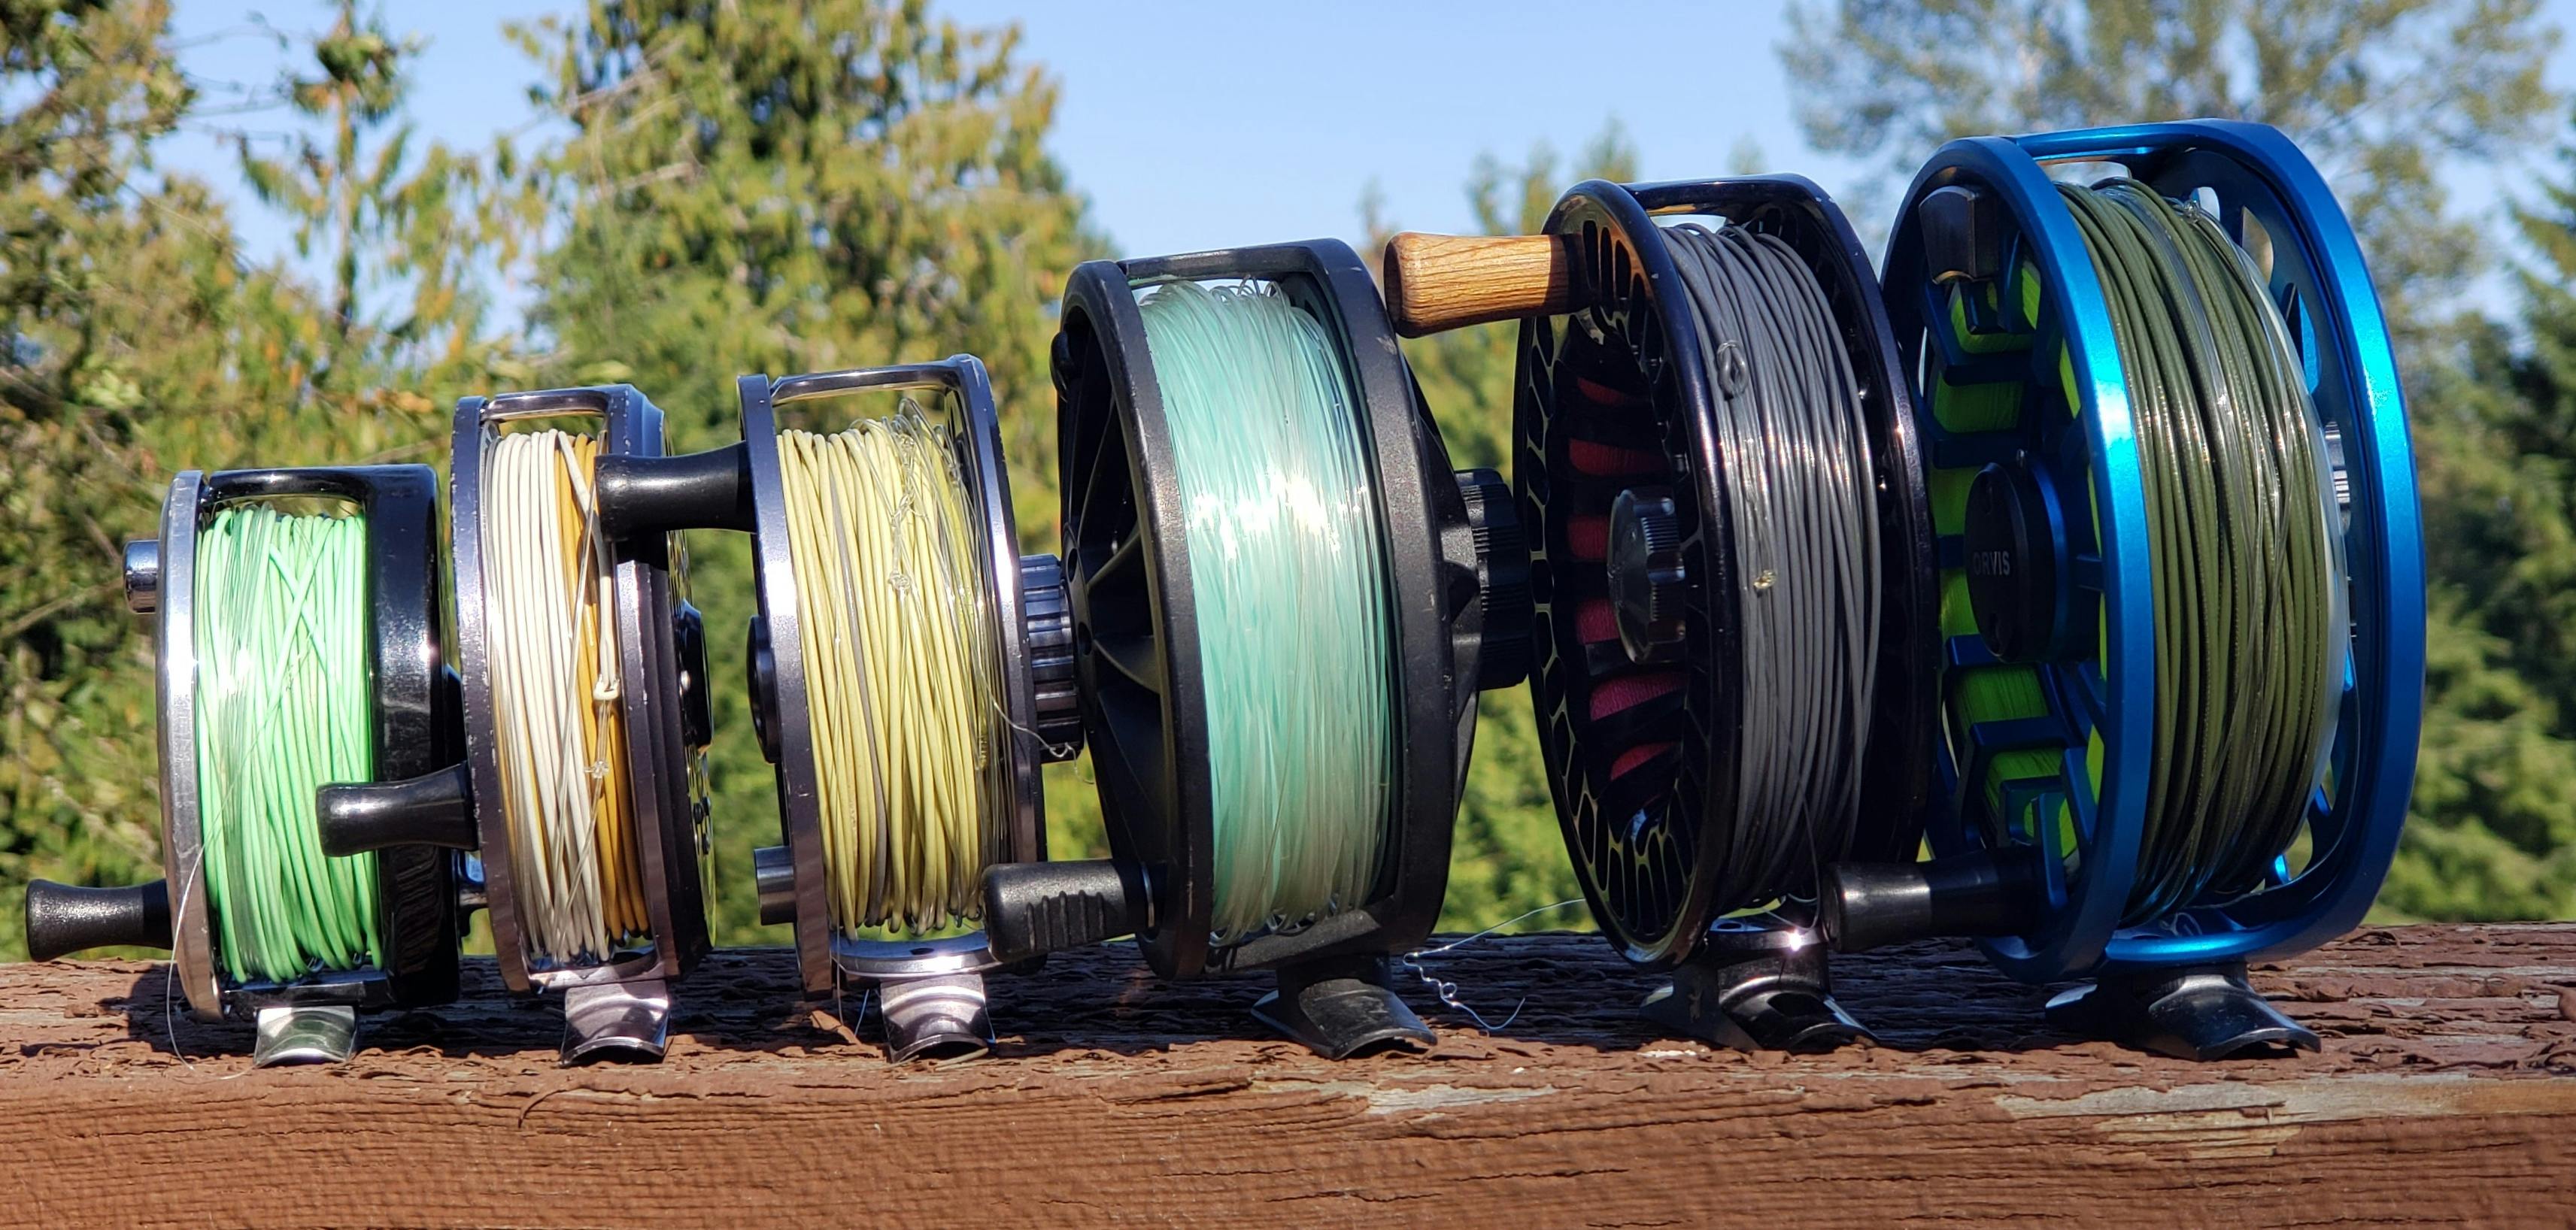 How to SETUP a Fly Fishing Reel! Add Backing & Fly Line! 2020